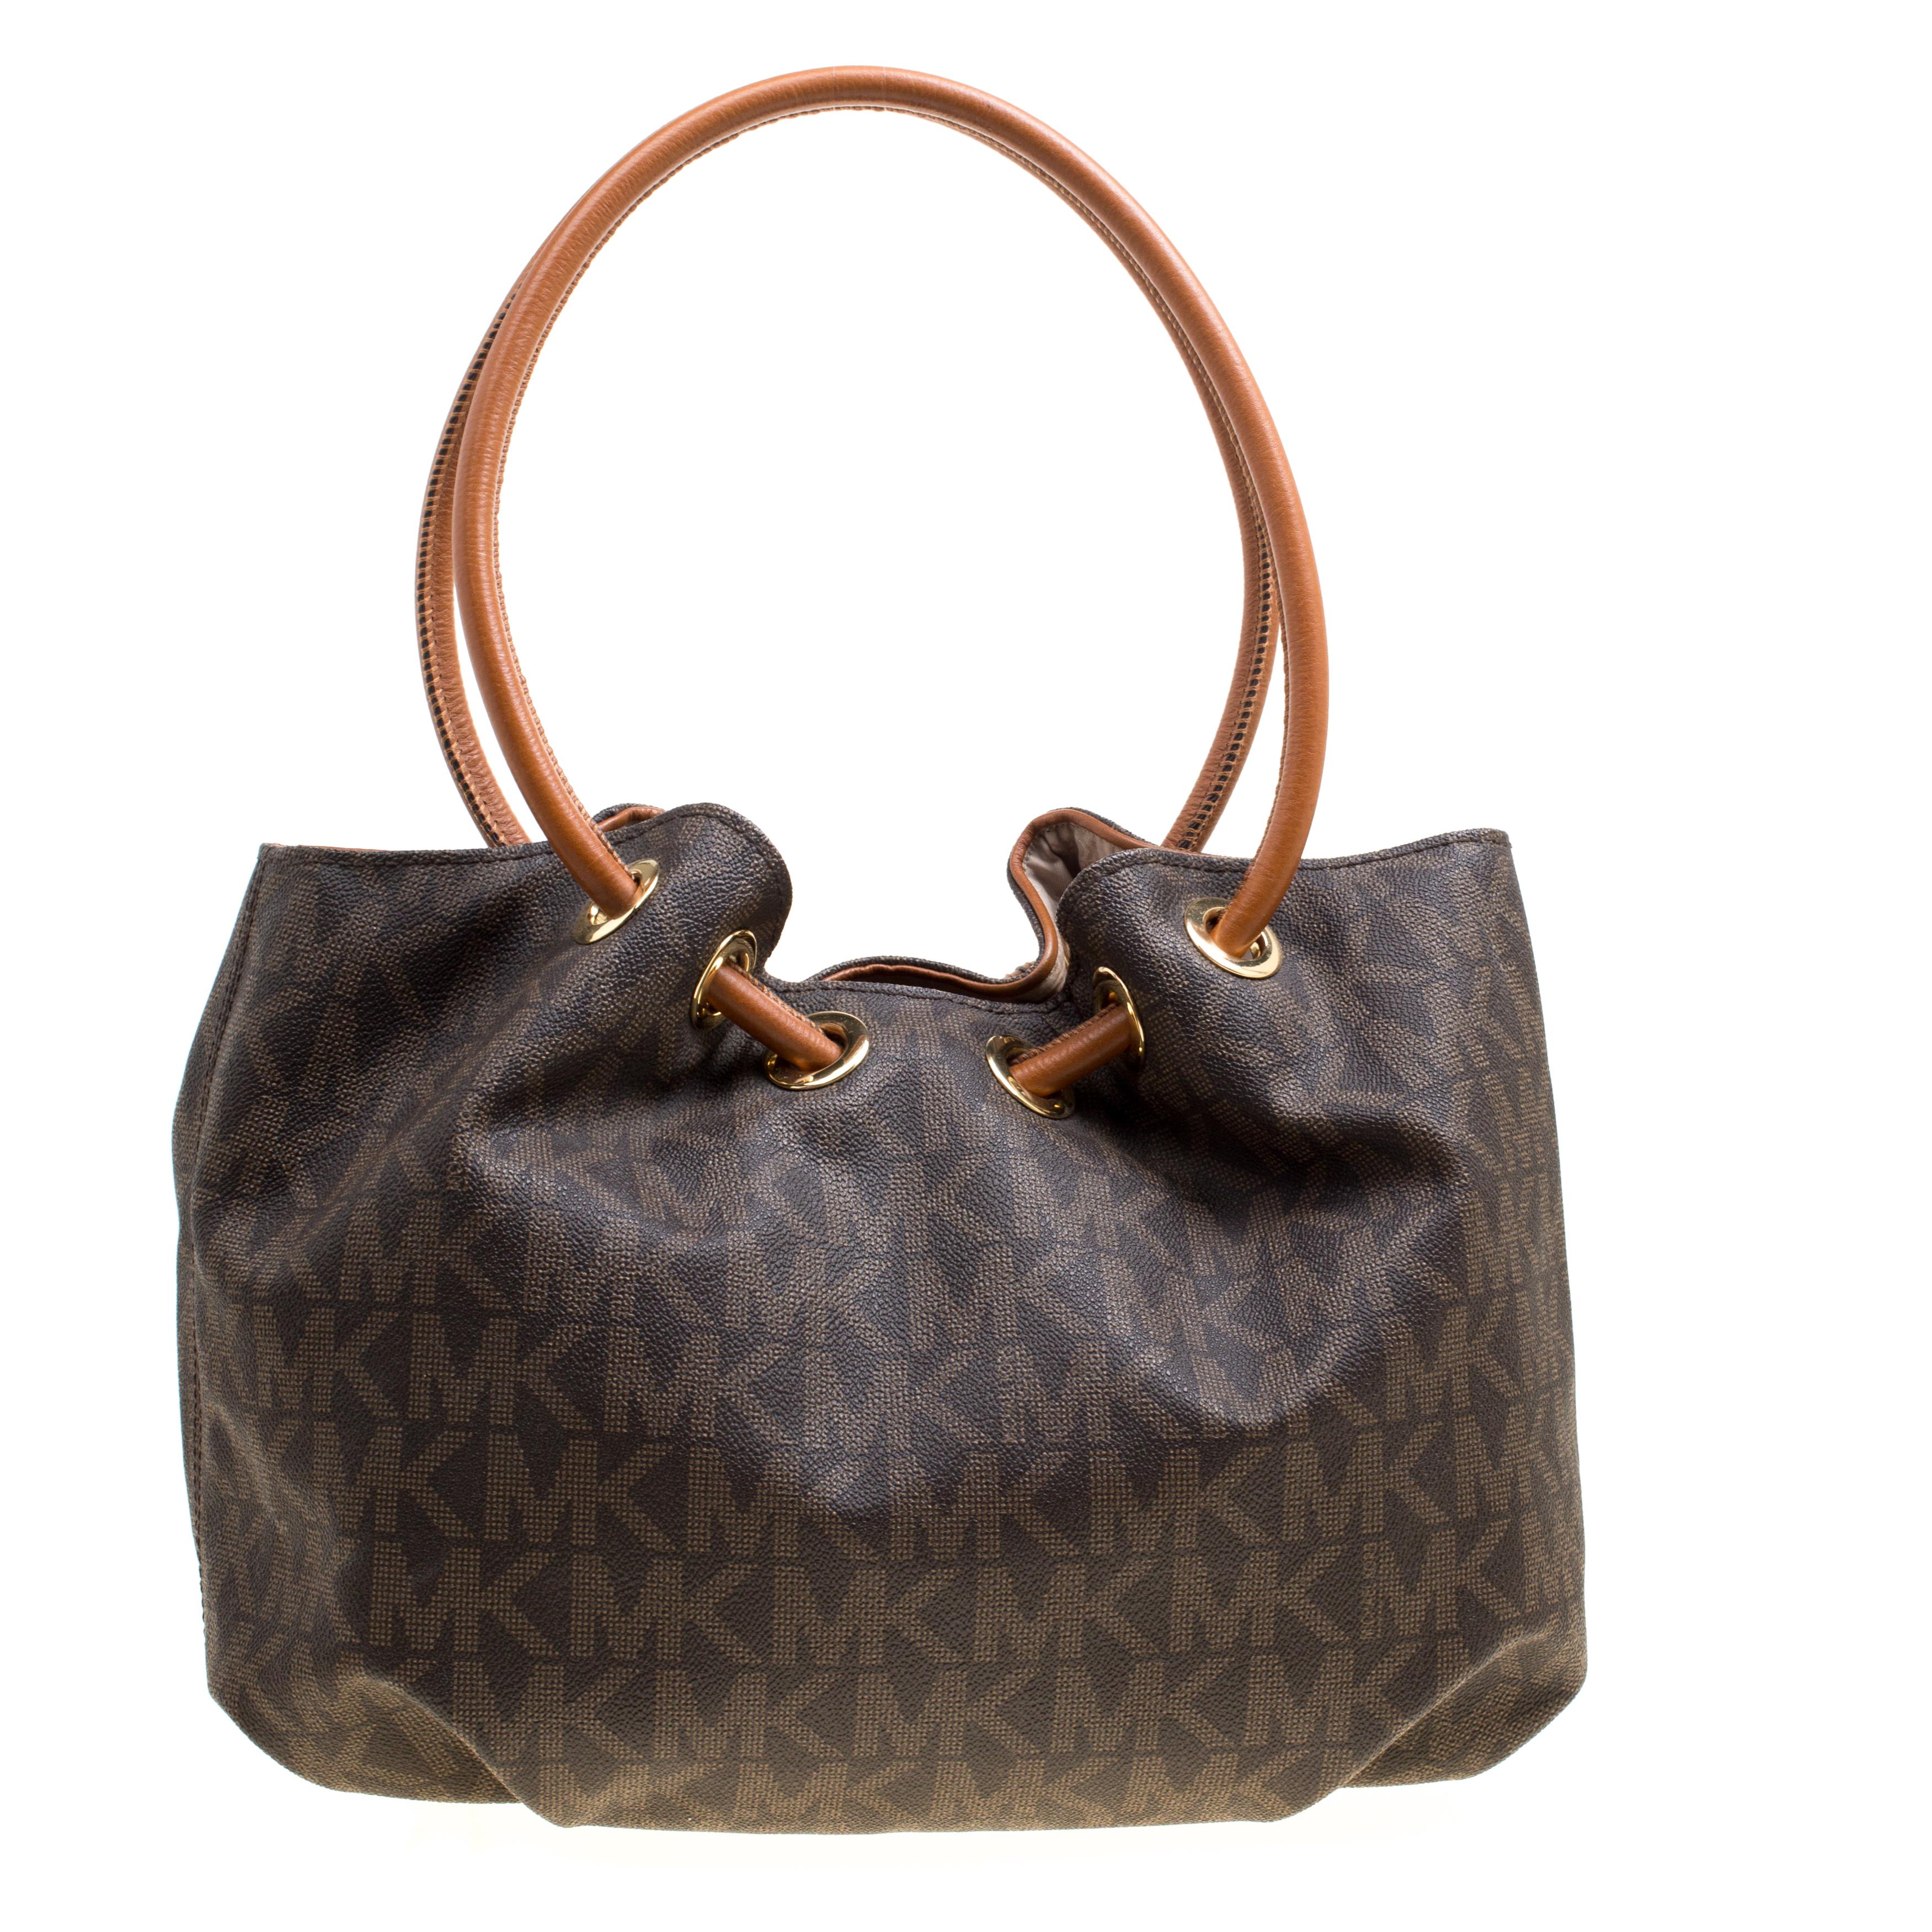 Look polished and sophisticated while you carry this Michael Kors bag. This signature coated canvas and leather bag is sturdy and can hold all your essentials. It is held by ring handles and finished with a spacious fabric interior.

Includes: The